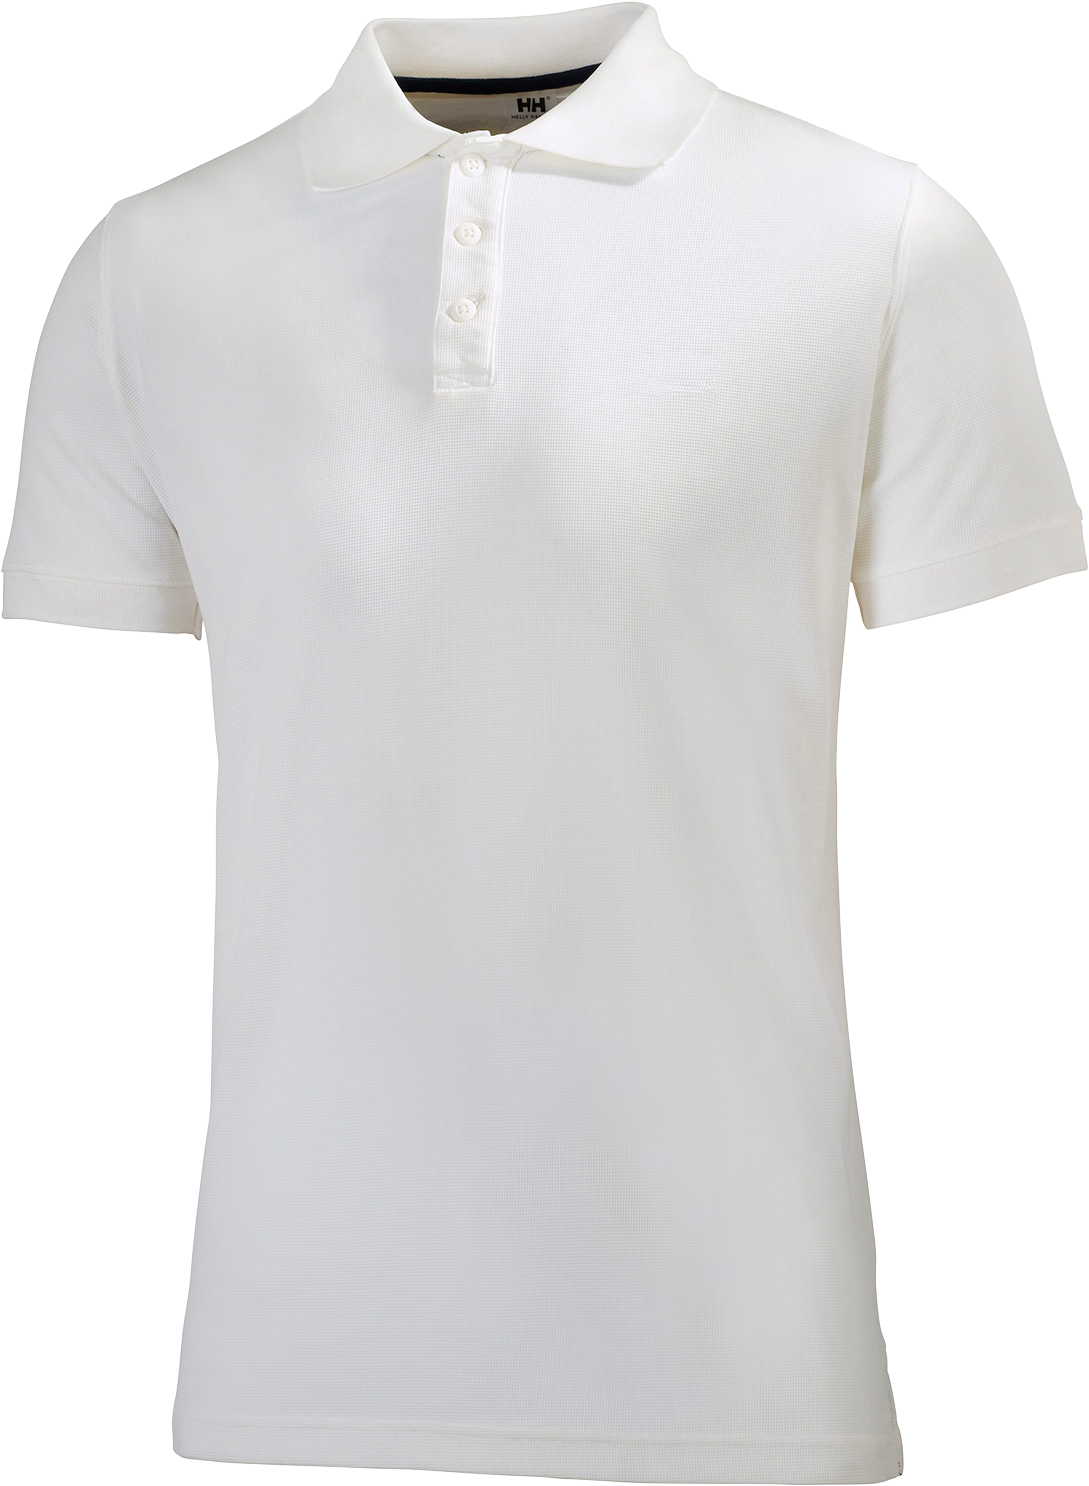 White Polo Shirt Product Display PNG